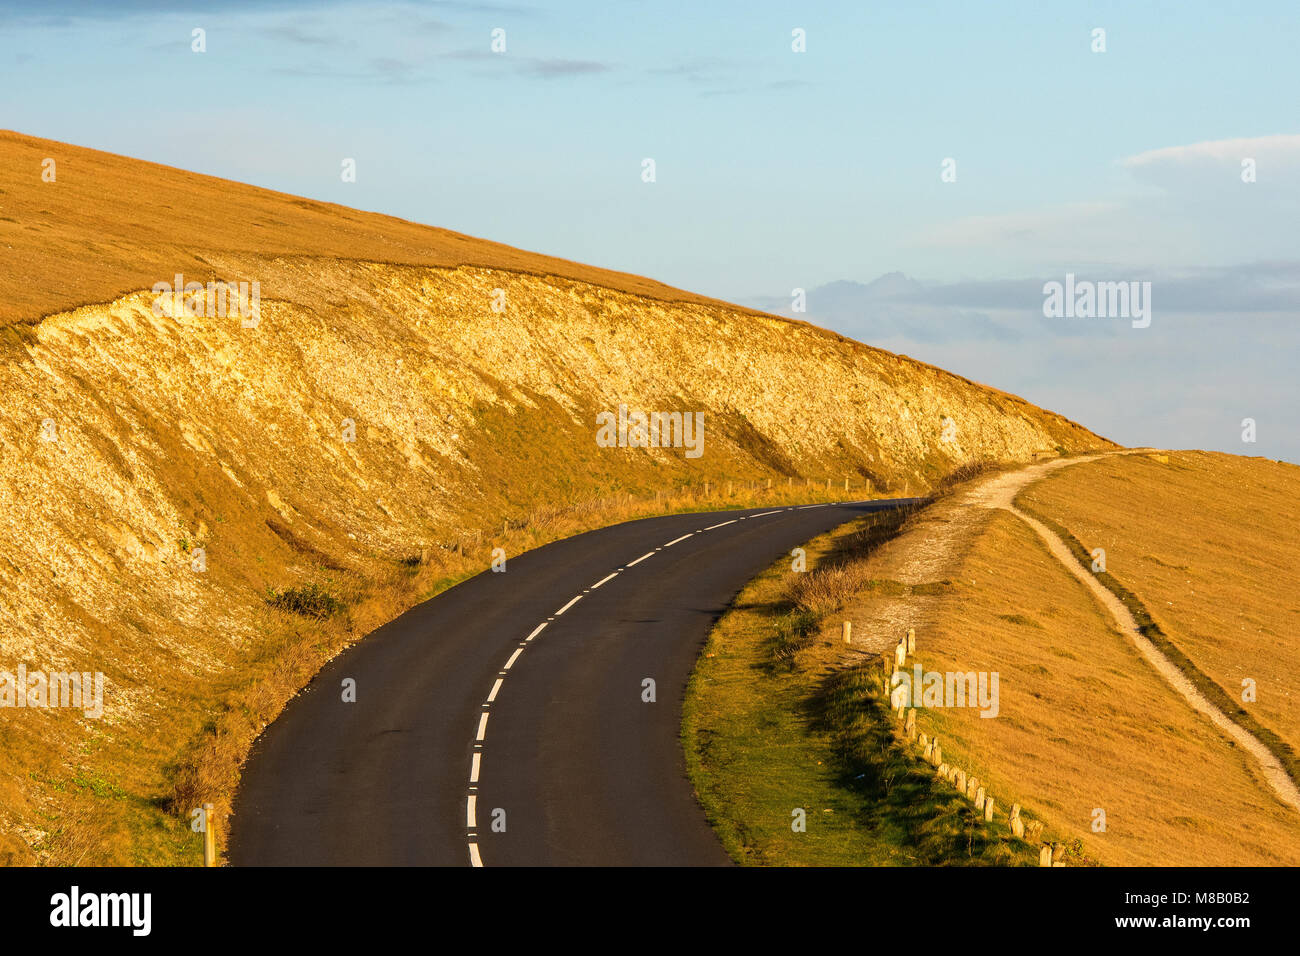 A road on the side or top of a mountain in a cutting through the hills disappearing into the distance and over the horizon.enndless road to nowhere. Stock Photo